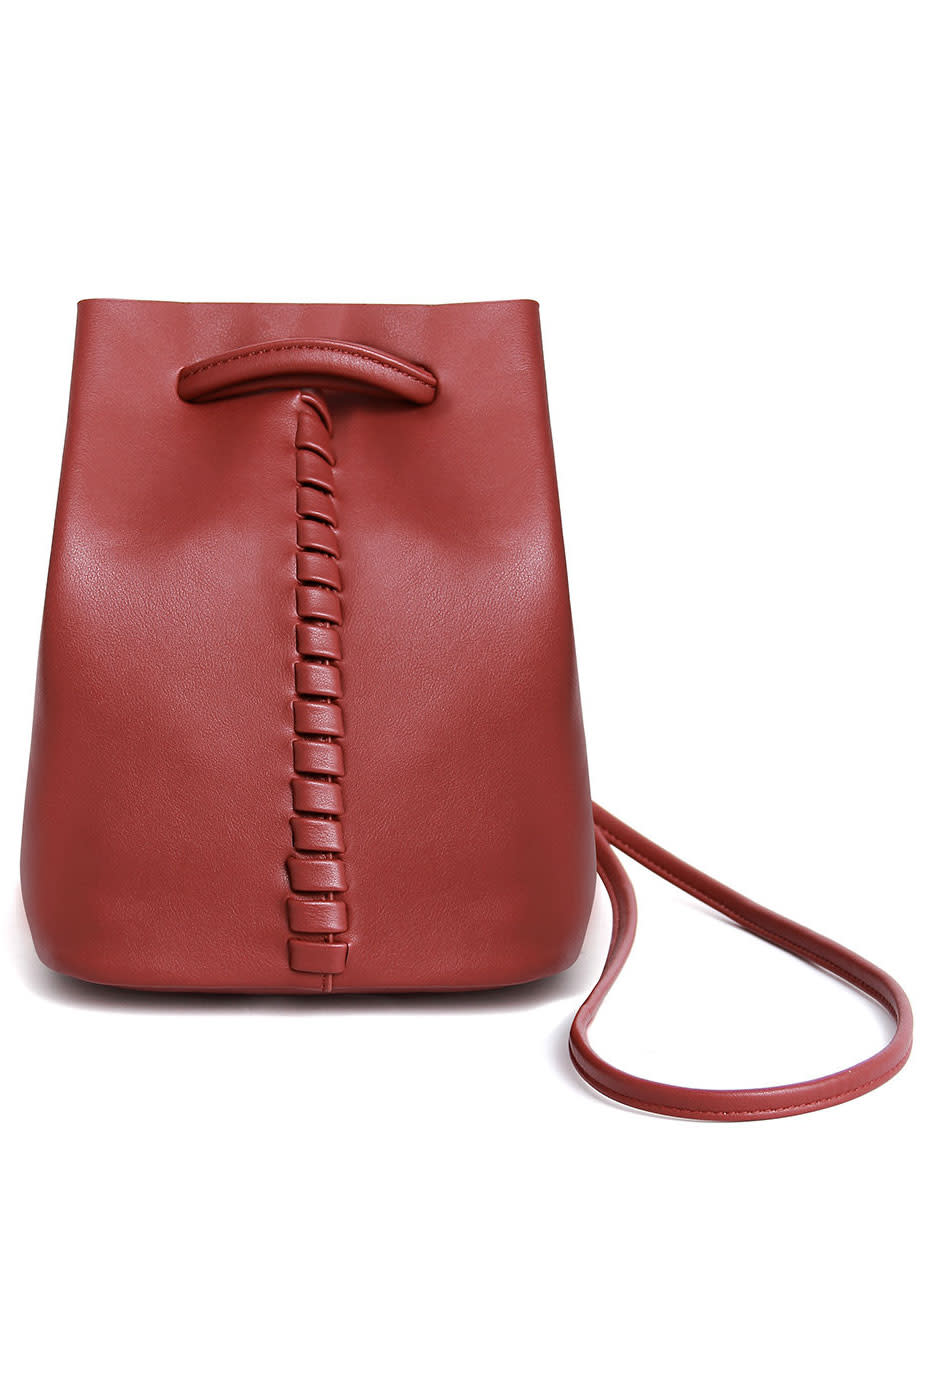 Yep, your essential bag is super affordable.<br><br><strong>Yoins</strong> Drawstring Leather Bucket Bag, $, available at <a href="https://go.skimresources.com/?id=30283X879131&url=http%3A%2F%2Fwww.yoins.com%2FDrawstring-Leather-Bucket-Bag-in-Red-p-1042754.html" rel="nofollow noopener" target="_blank" data-ylk="slk:Yoins" class="link ">Yoins</a>